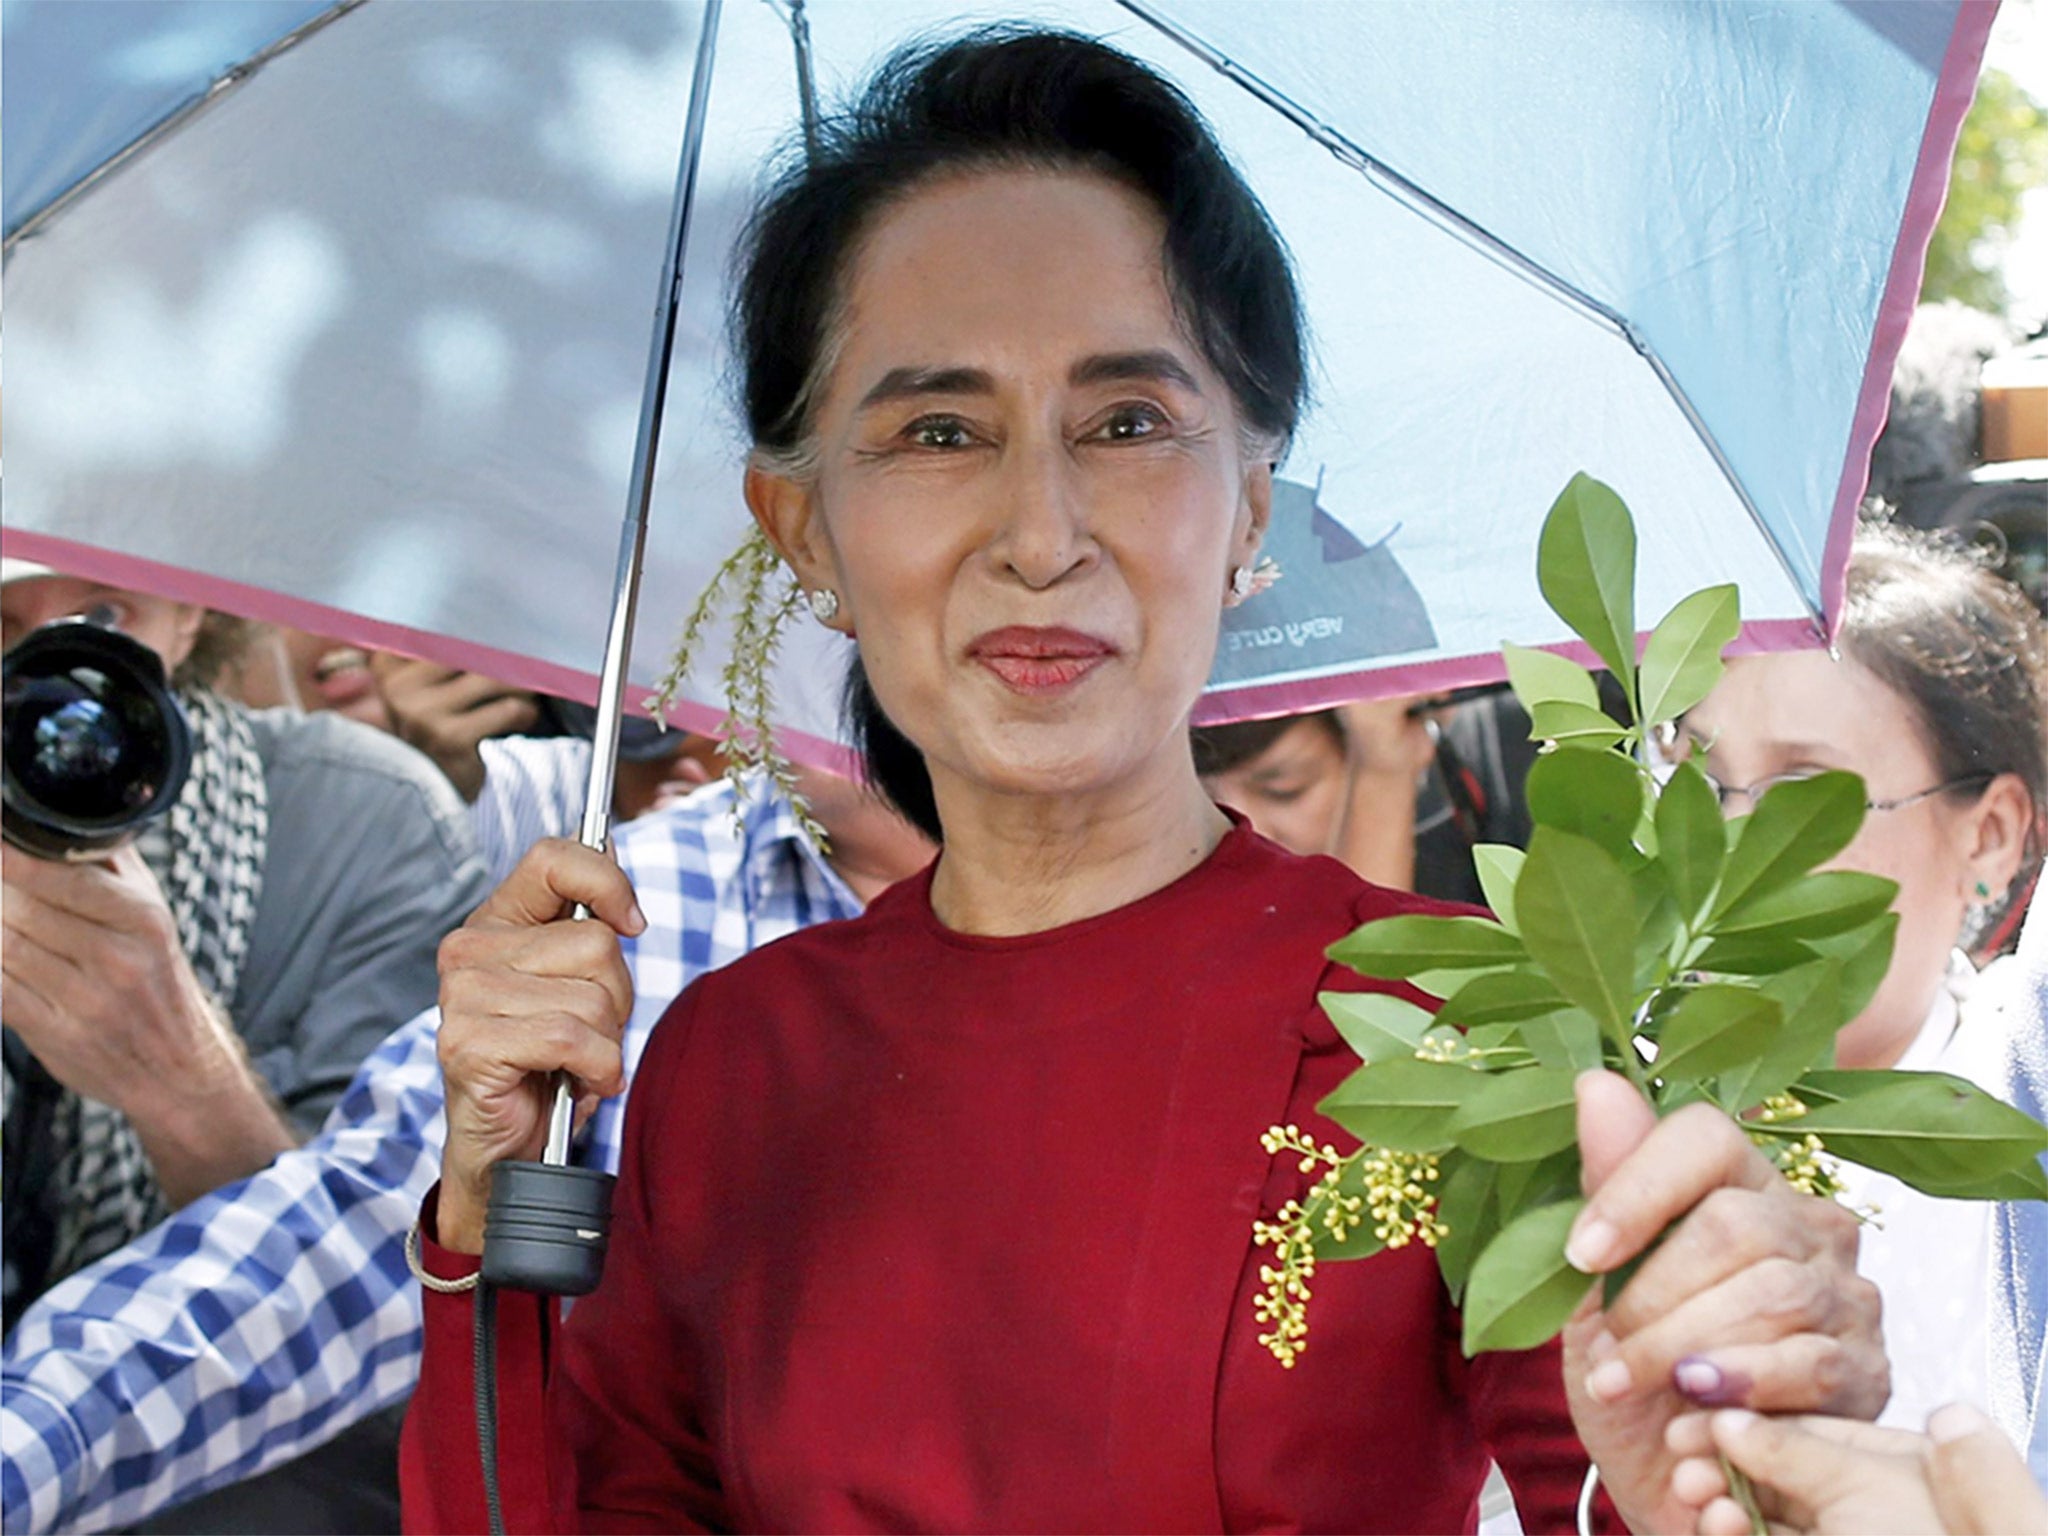 Aung San Suu Kyi said she will be running the country